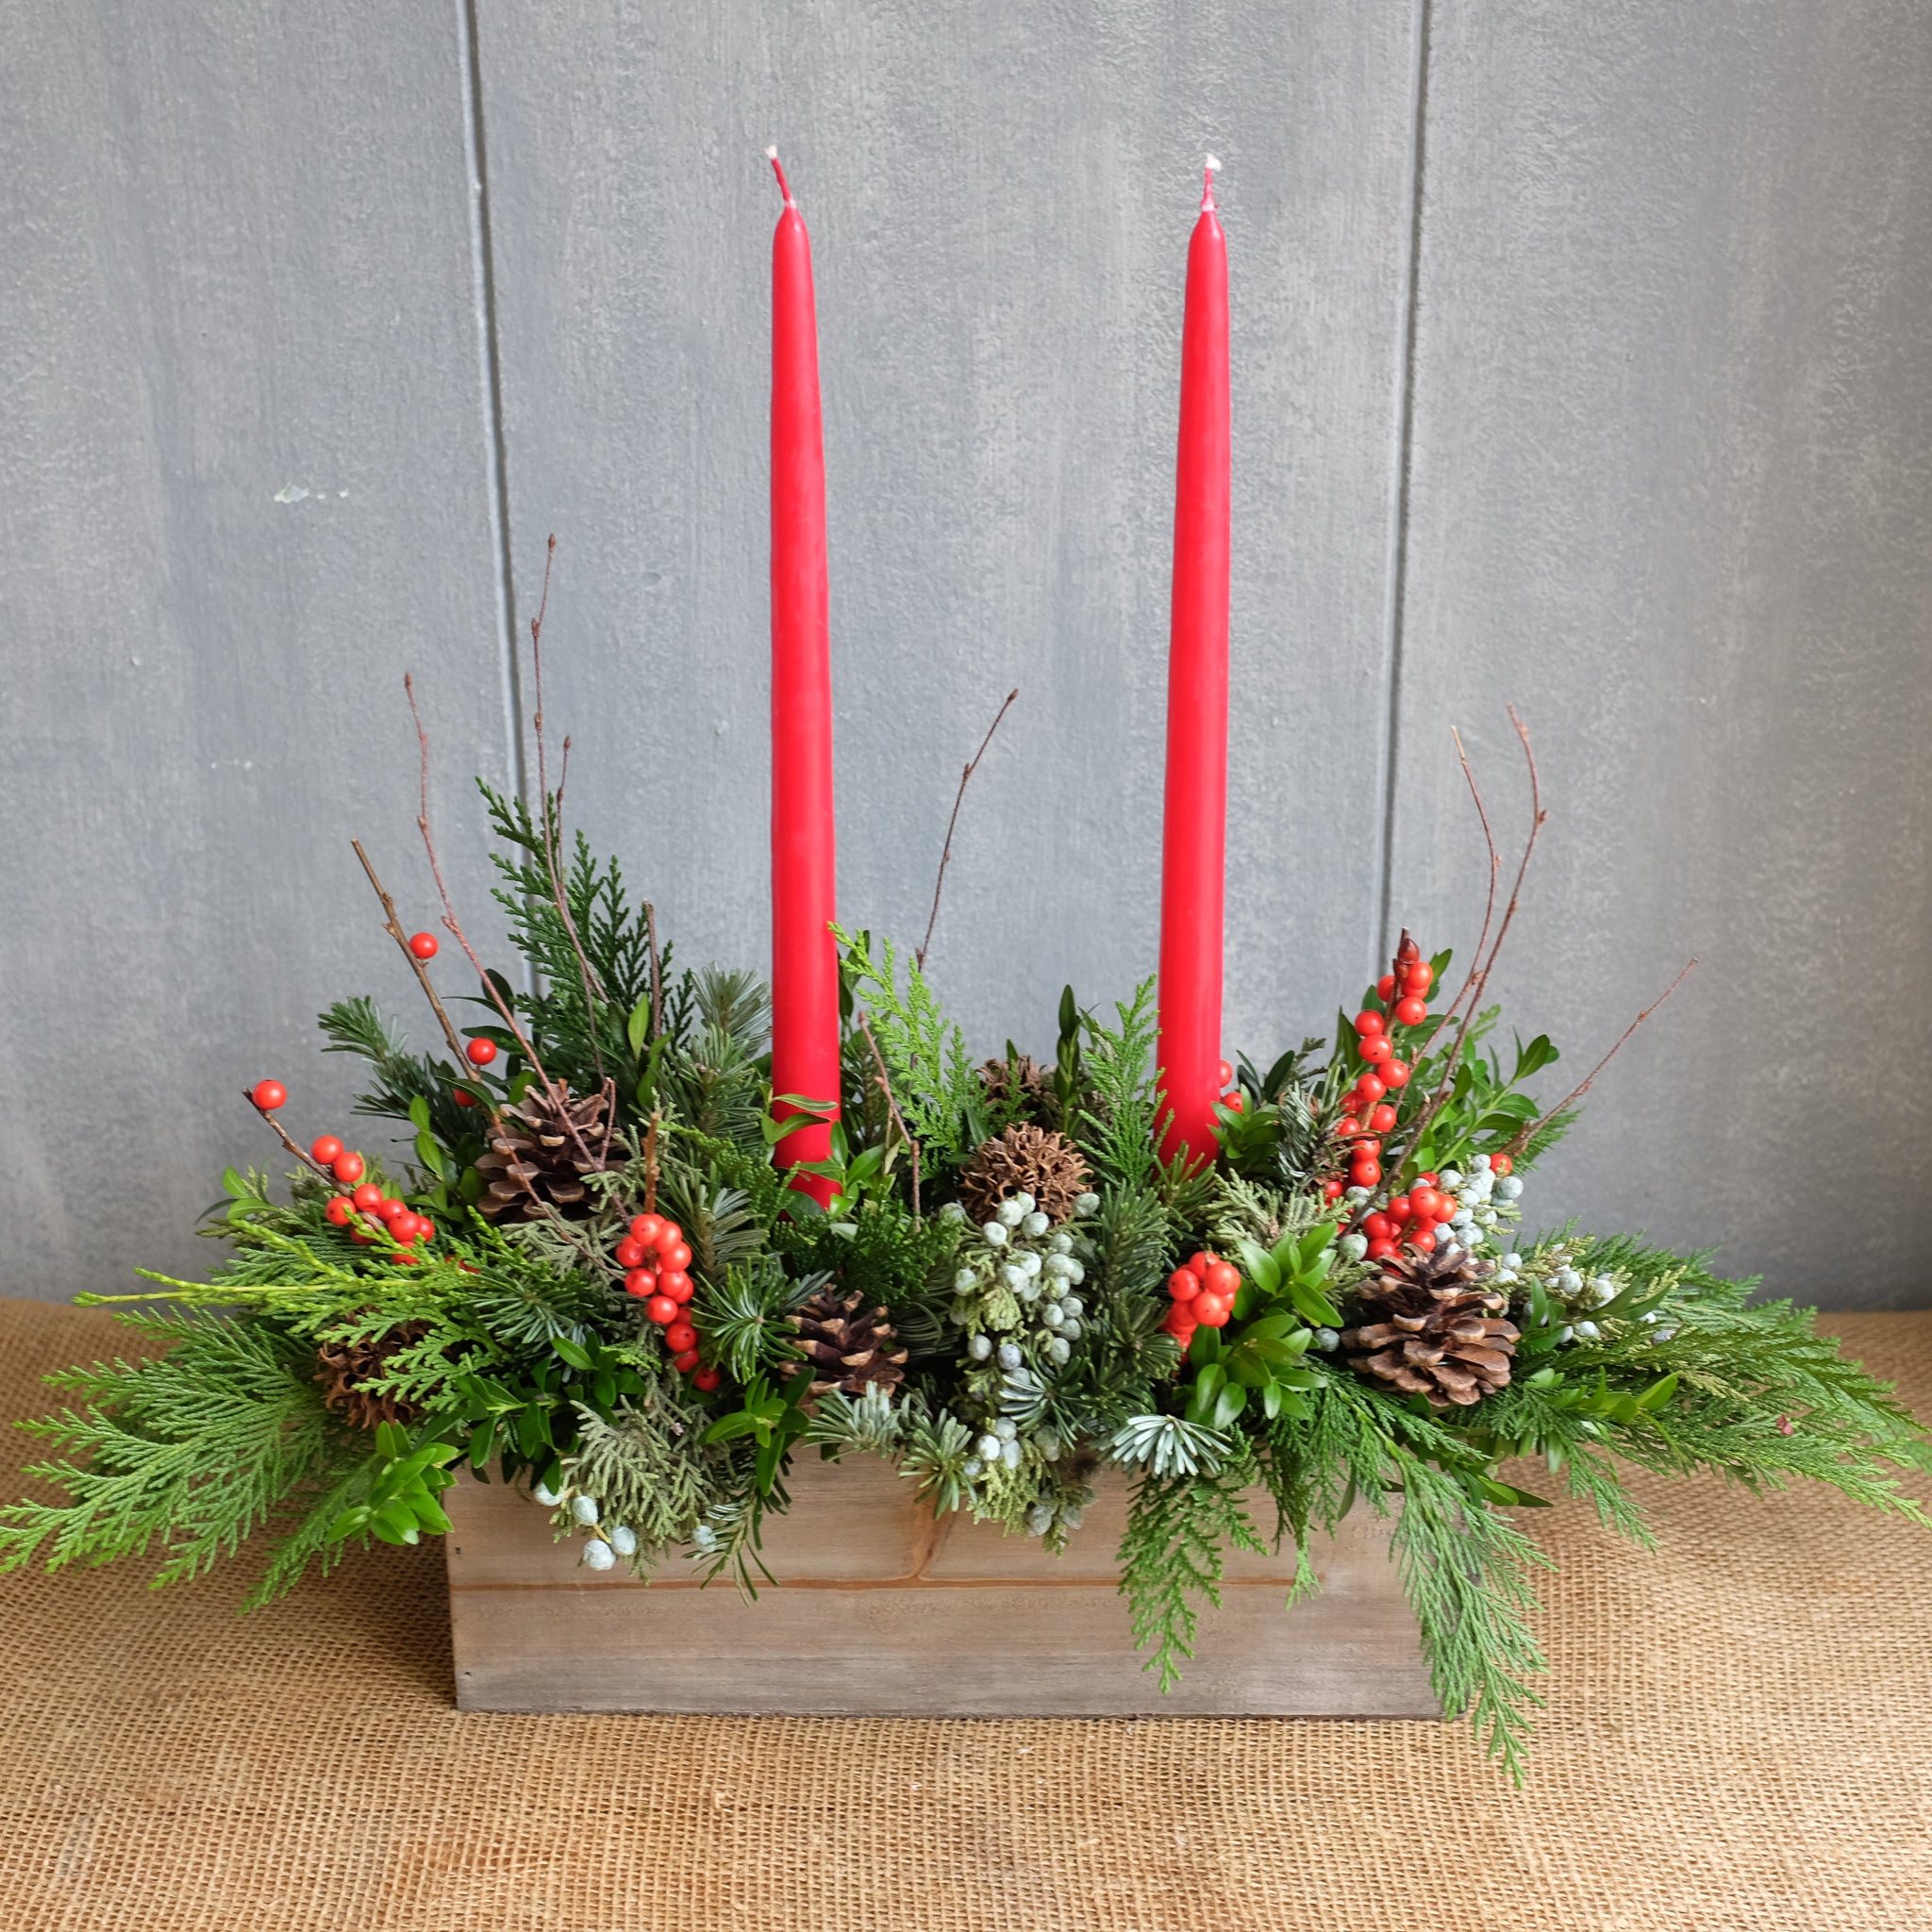 Evergreen box with candles